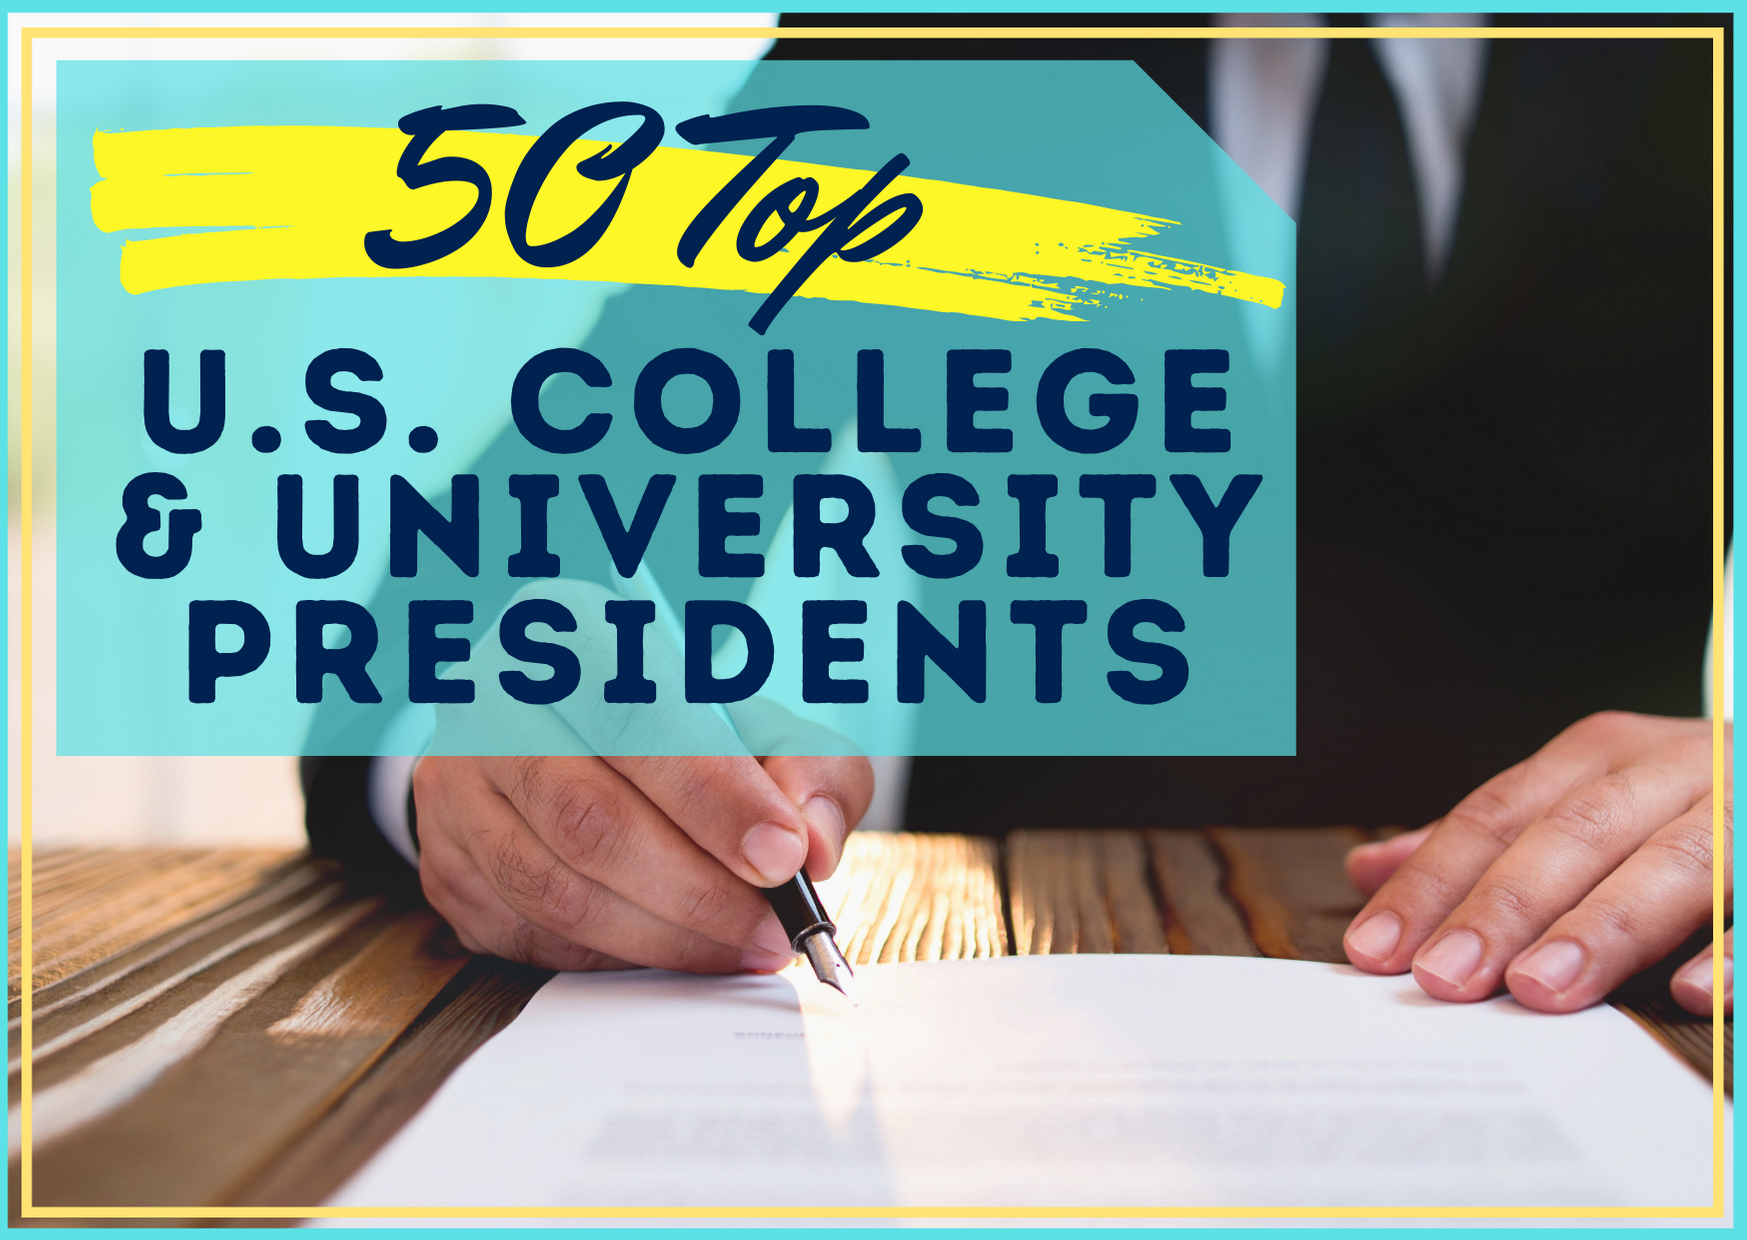 50 Top U.S. College and University Presidents College Cliffs